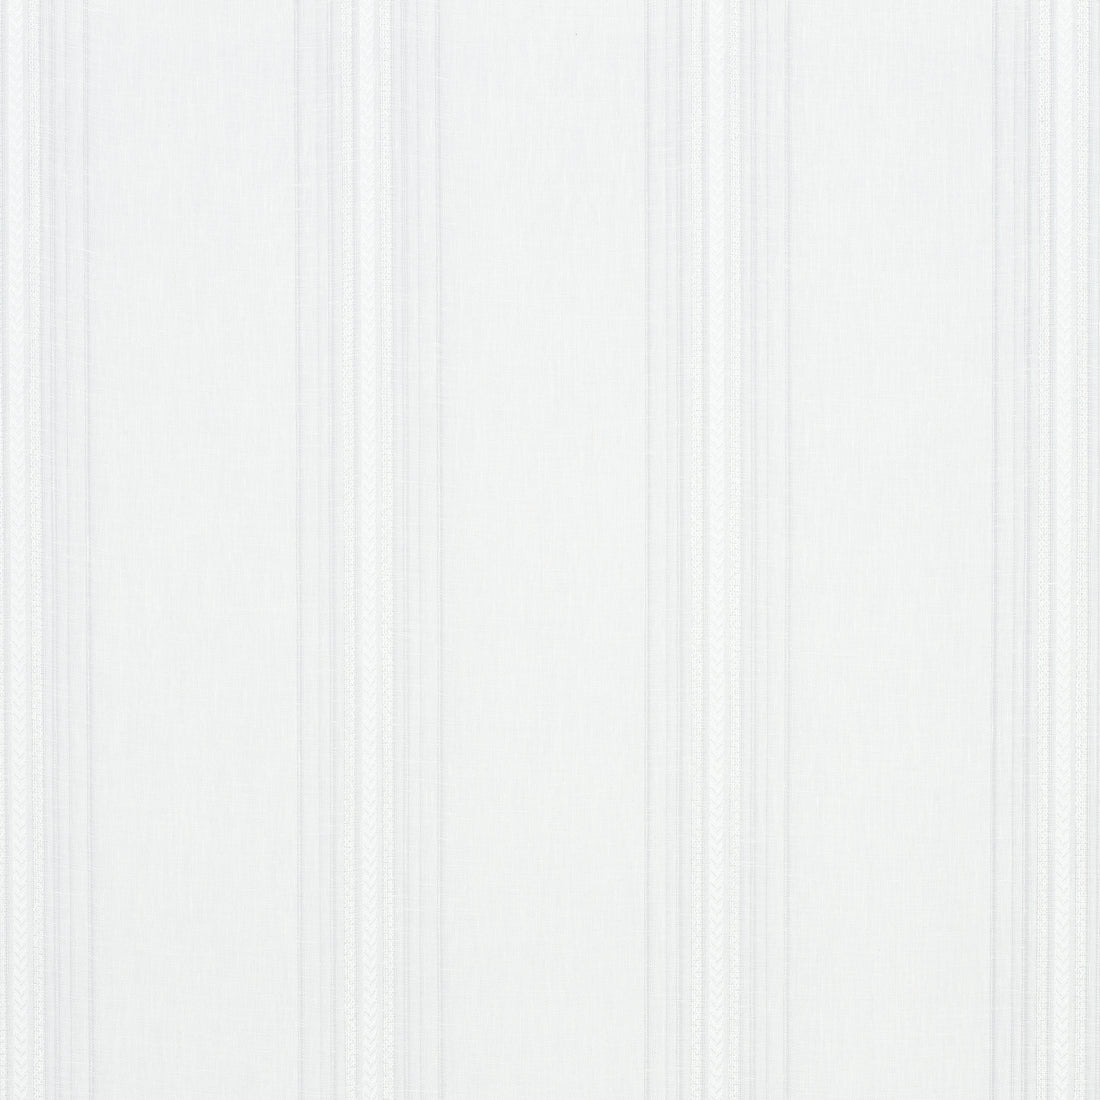 Bromley Stripe fabric in snow white color - pattern number FWW7101 - by Thibaut in the Atmosphere collection